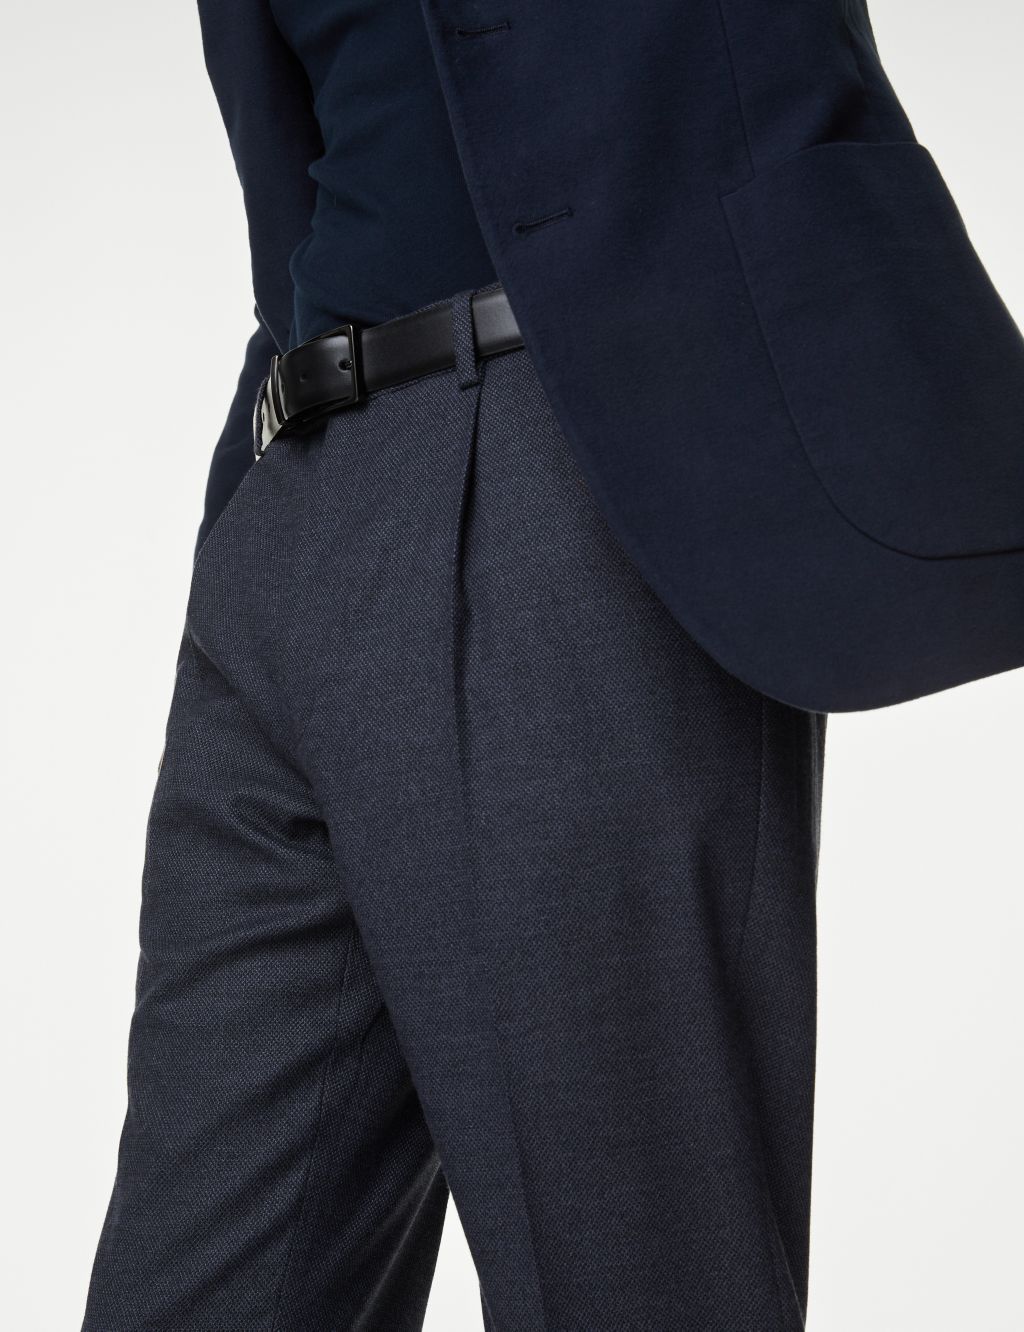 Textured Stretch Trousers image 4